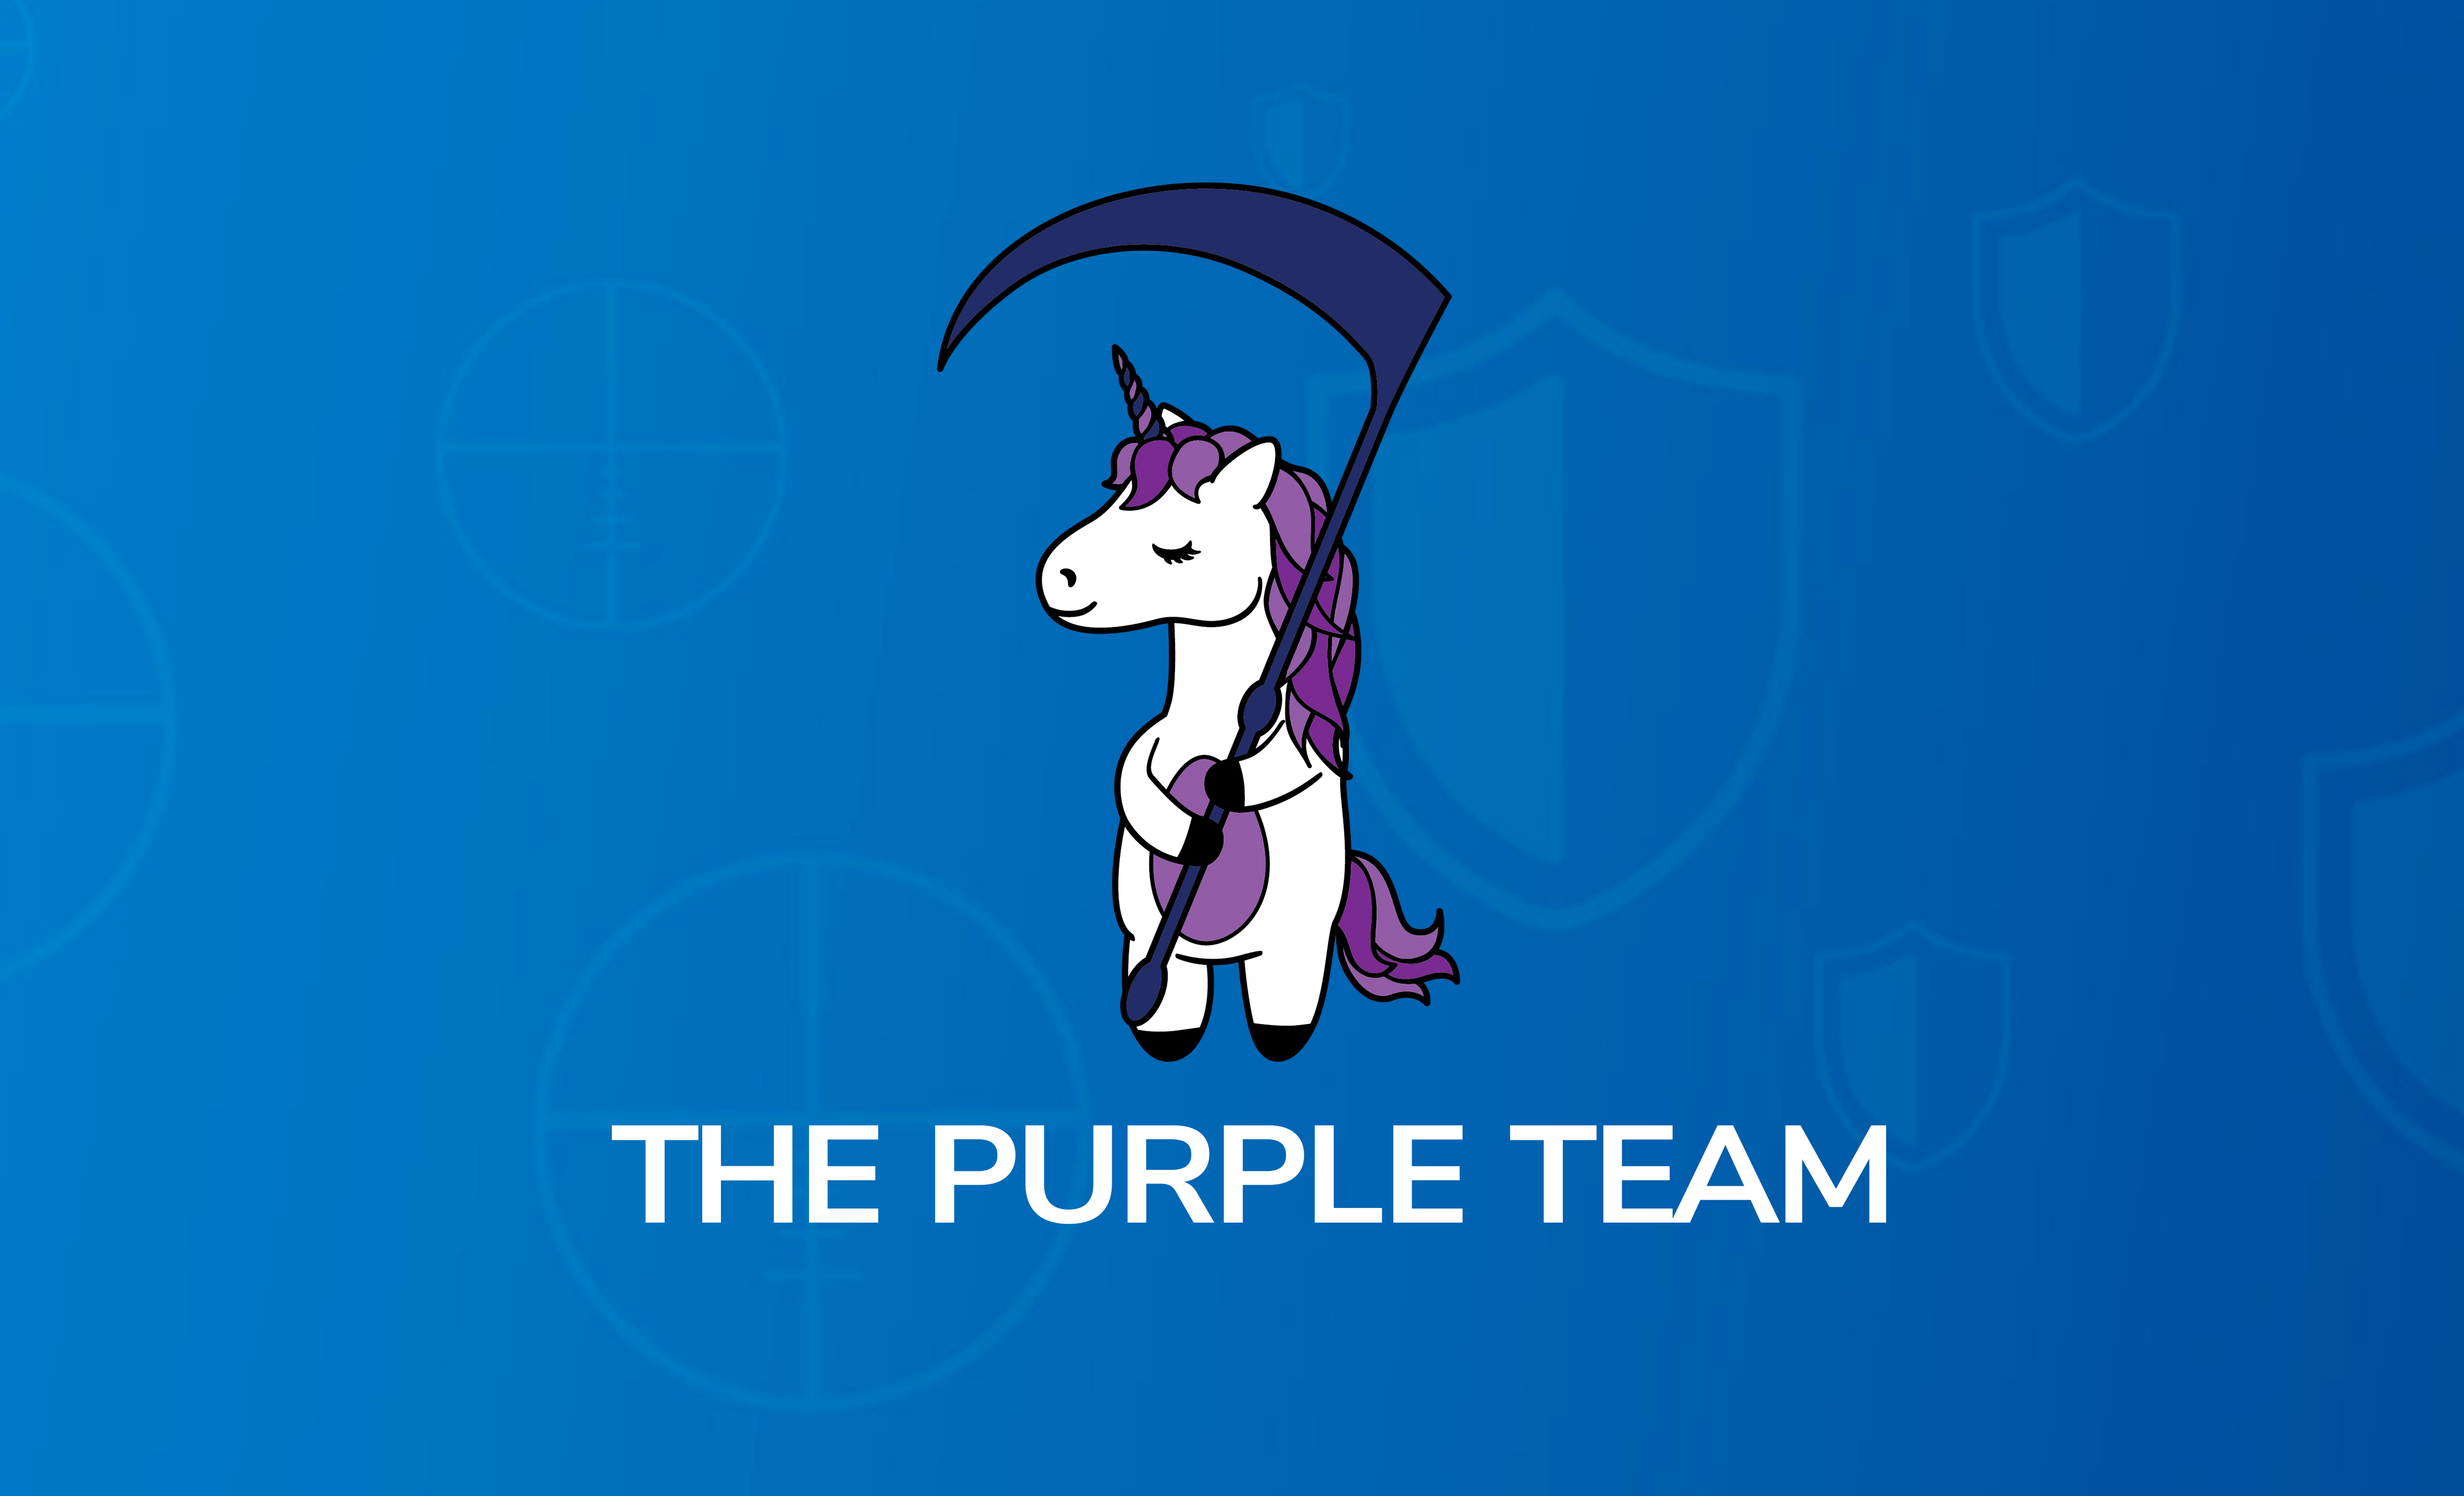 The Purple Team - Organization or Exercise